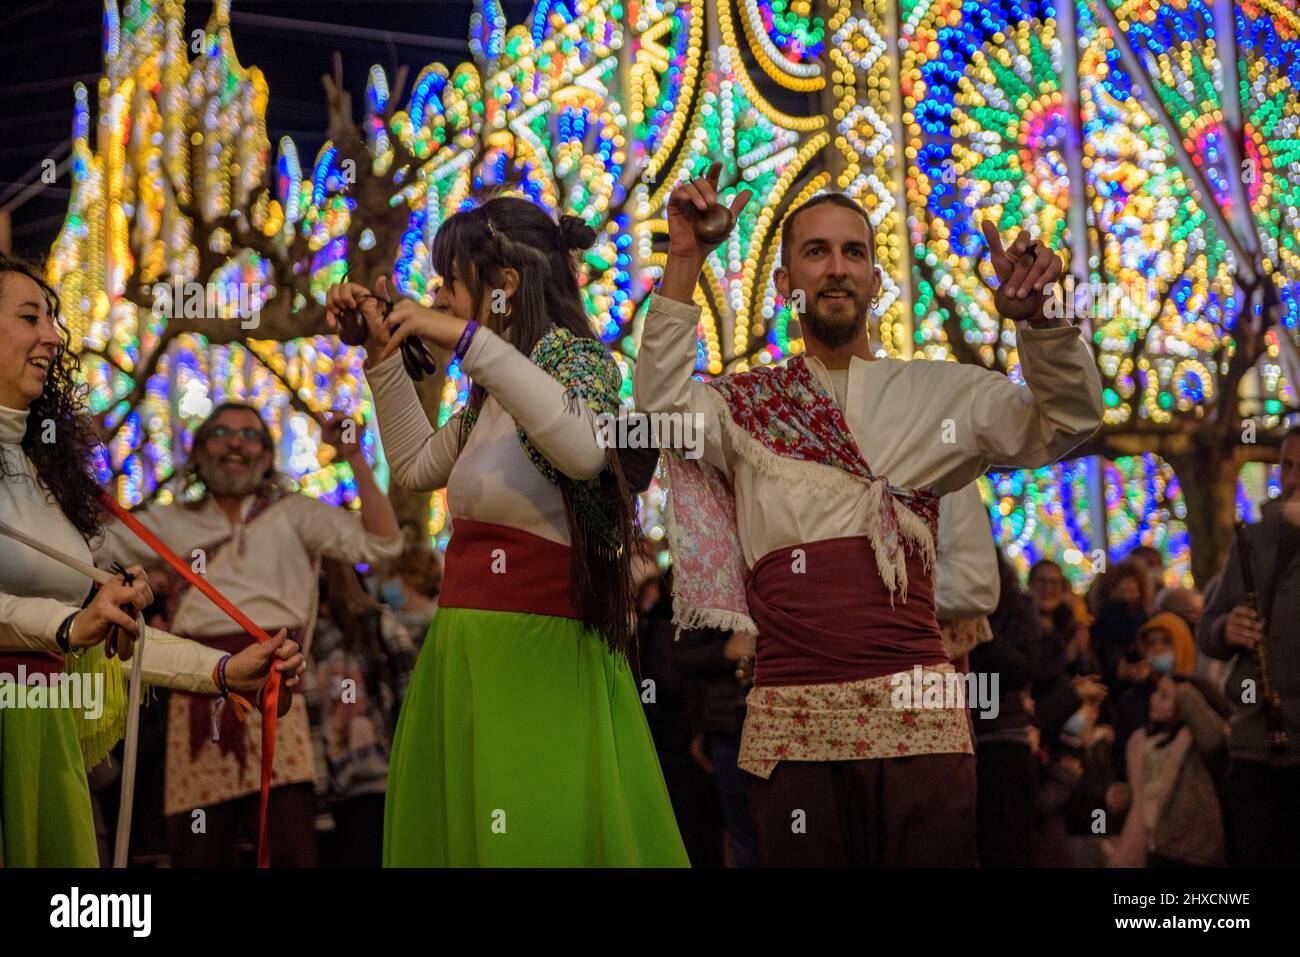 The Valls gypsy dance in the Procession of the 2022 Valls Decennial Festival, in honor of the Virgin of the Candlemas in Valls (Tarragona, Spain) Stock Photo